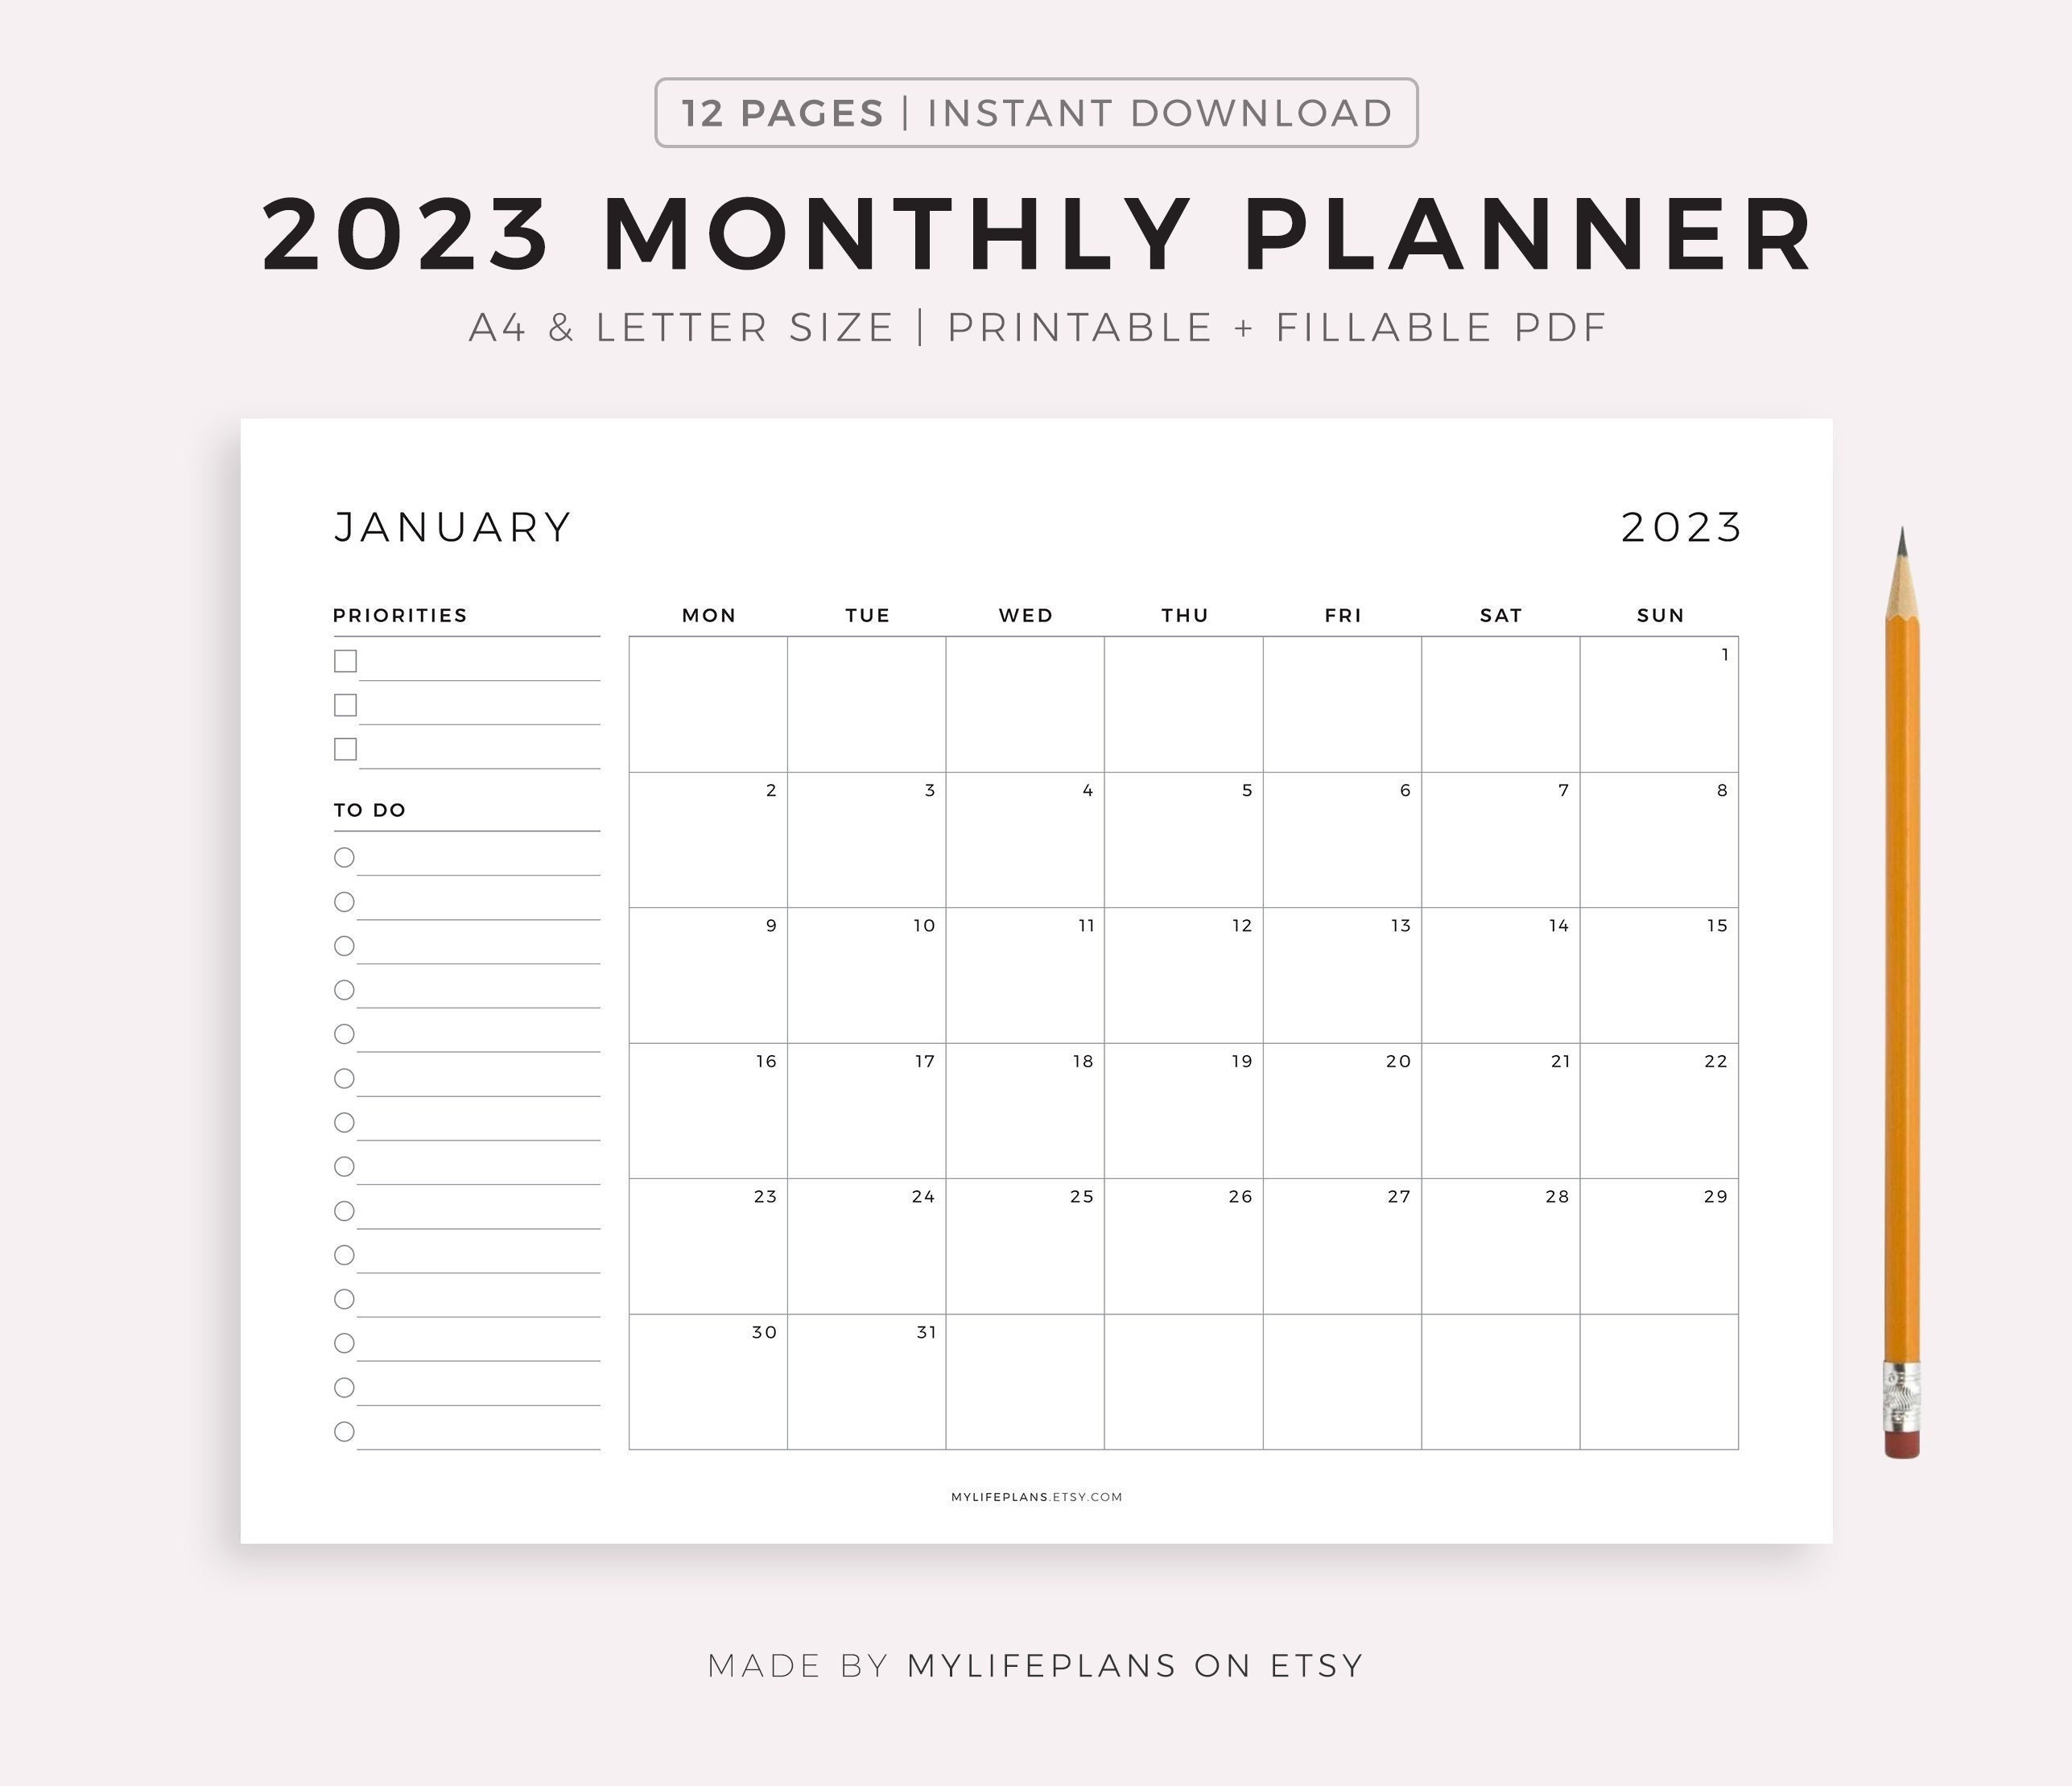 2023 Monthly Planner on One Page Landscape Monthly Organizer